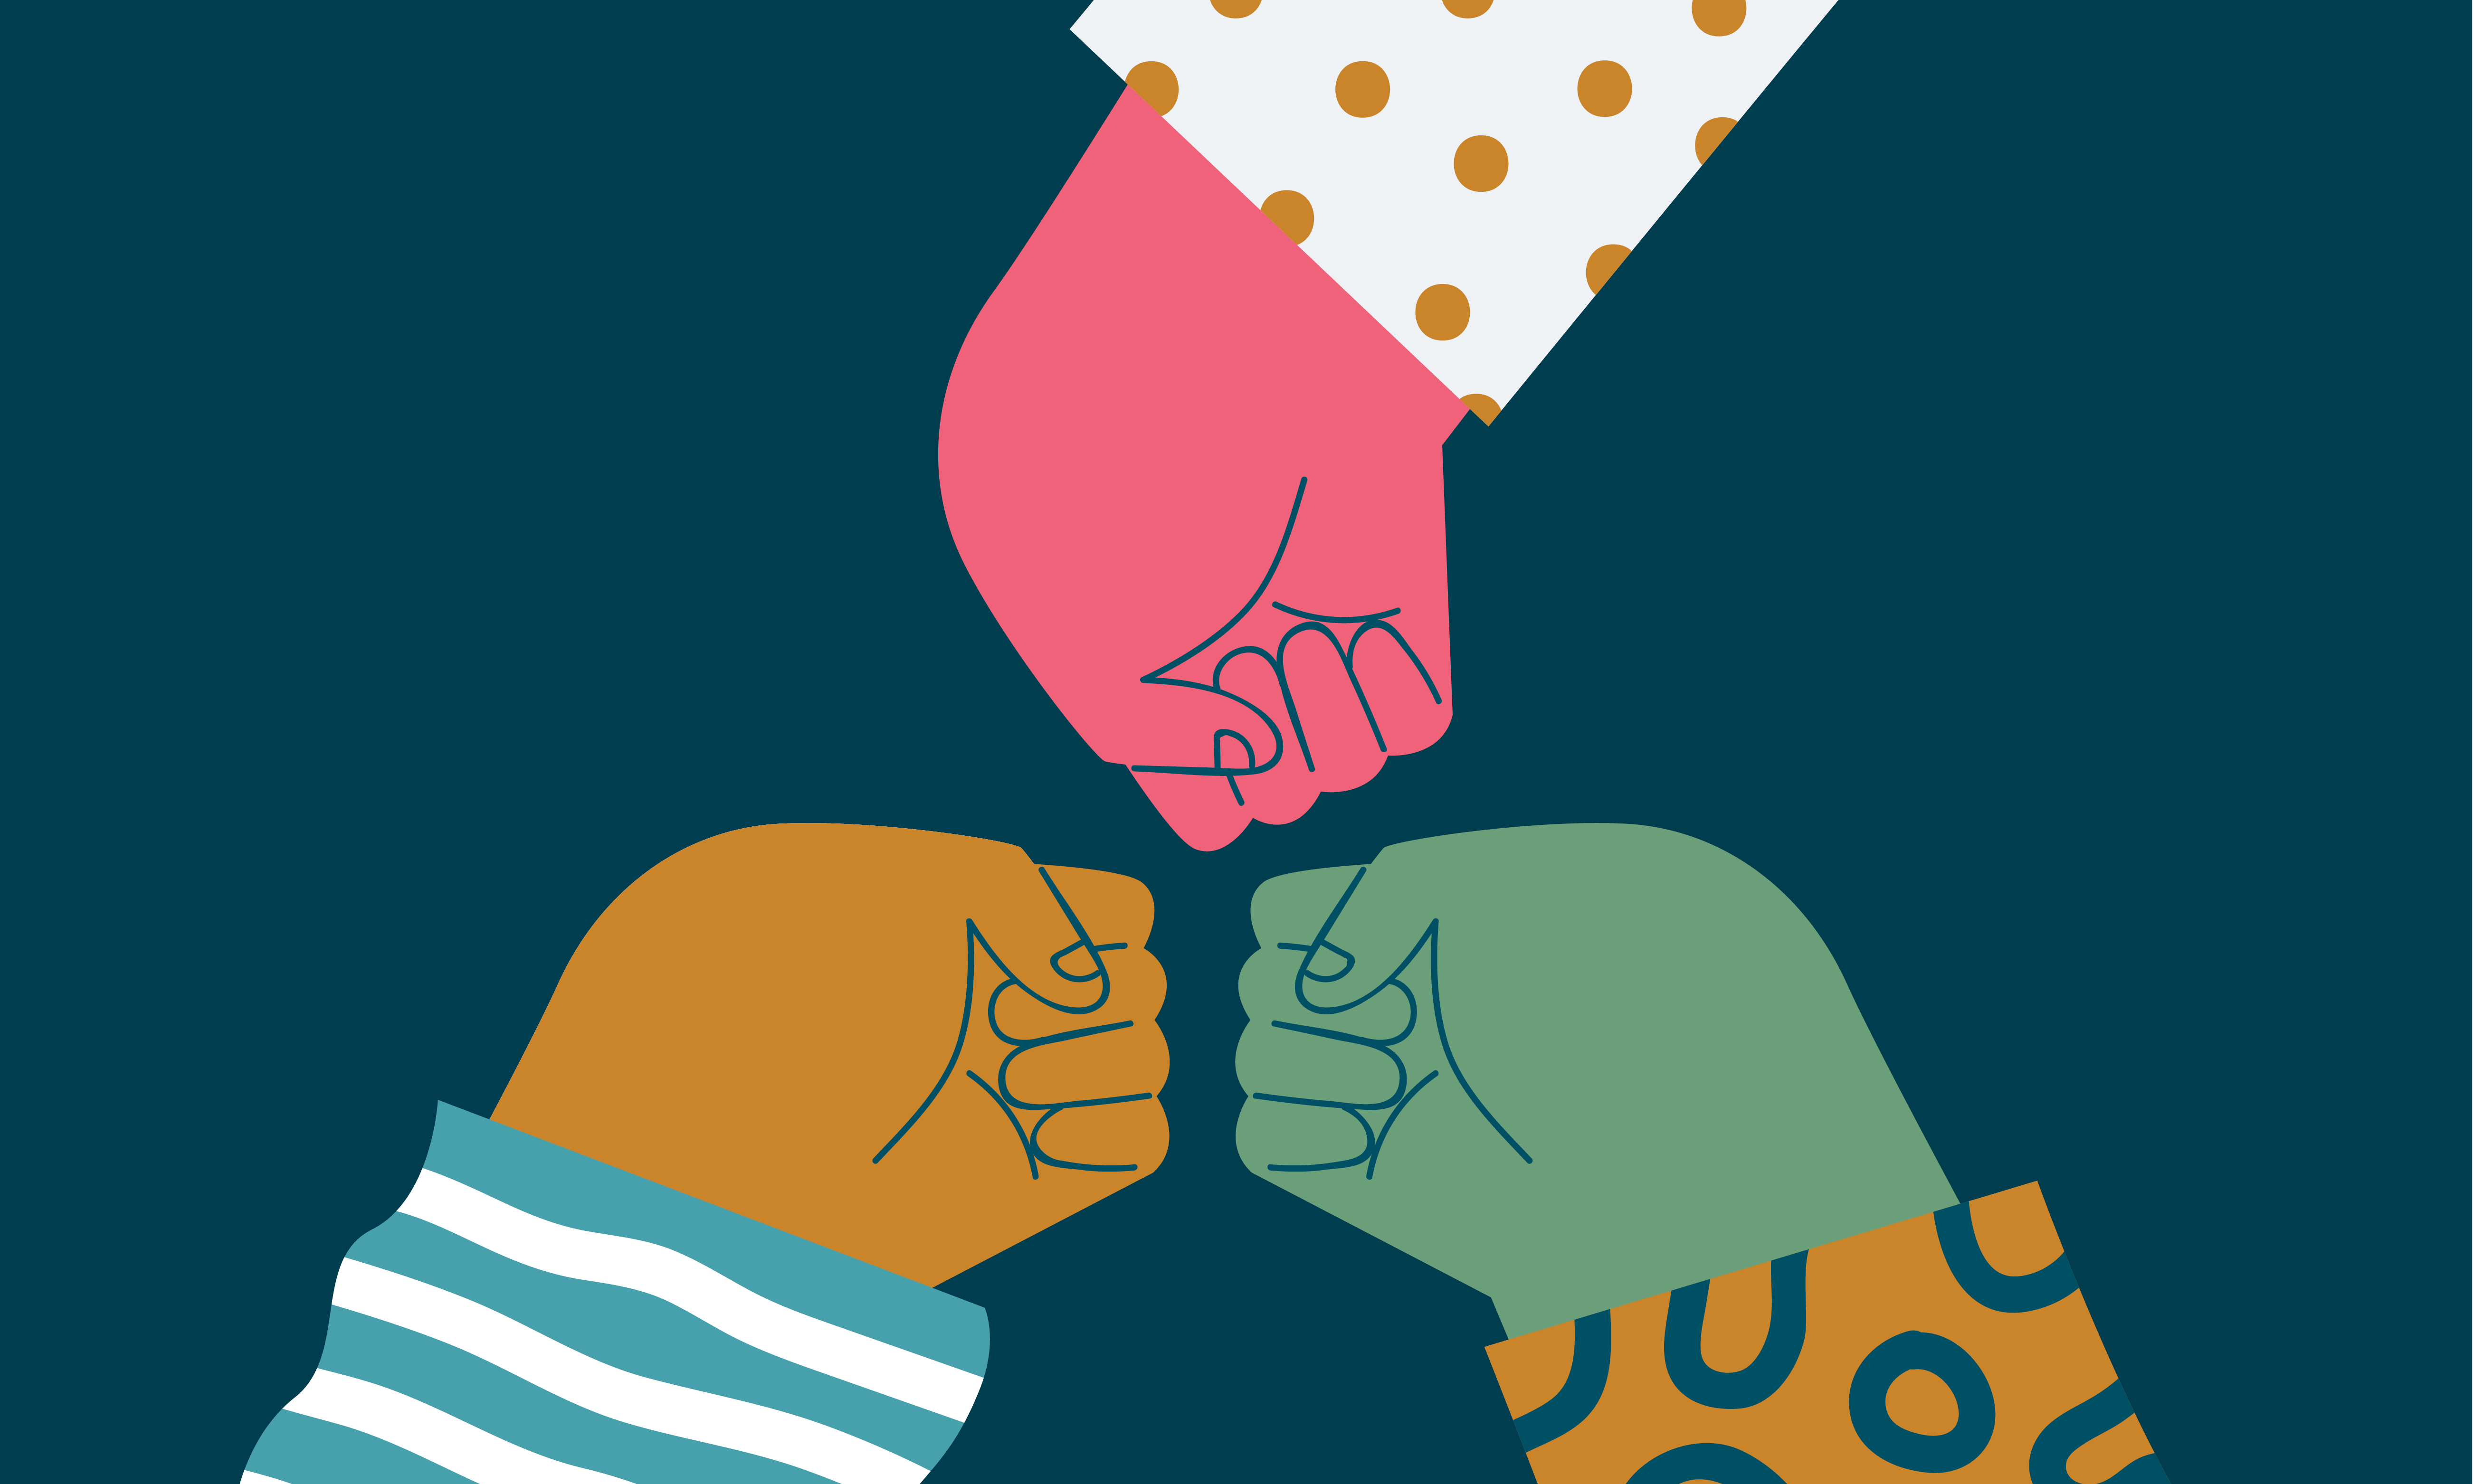 illustration of three hands fist bumping each other to show collaboration and team work